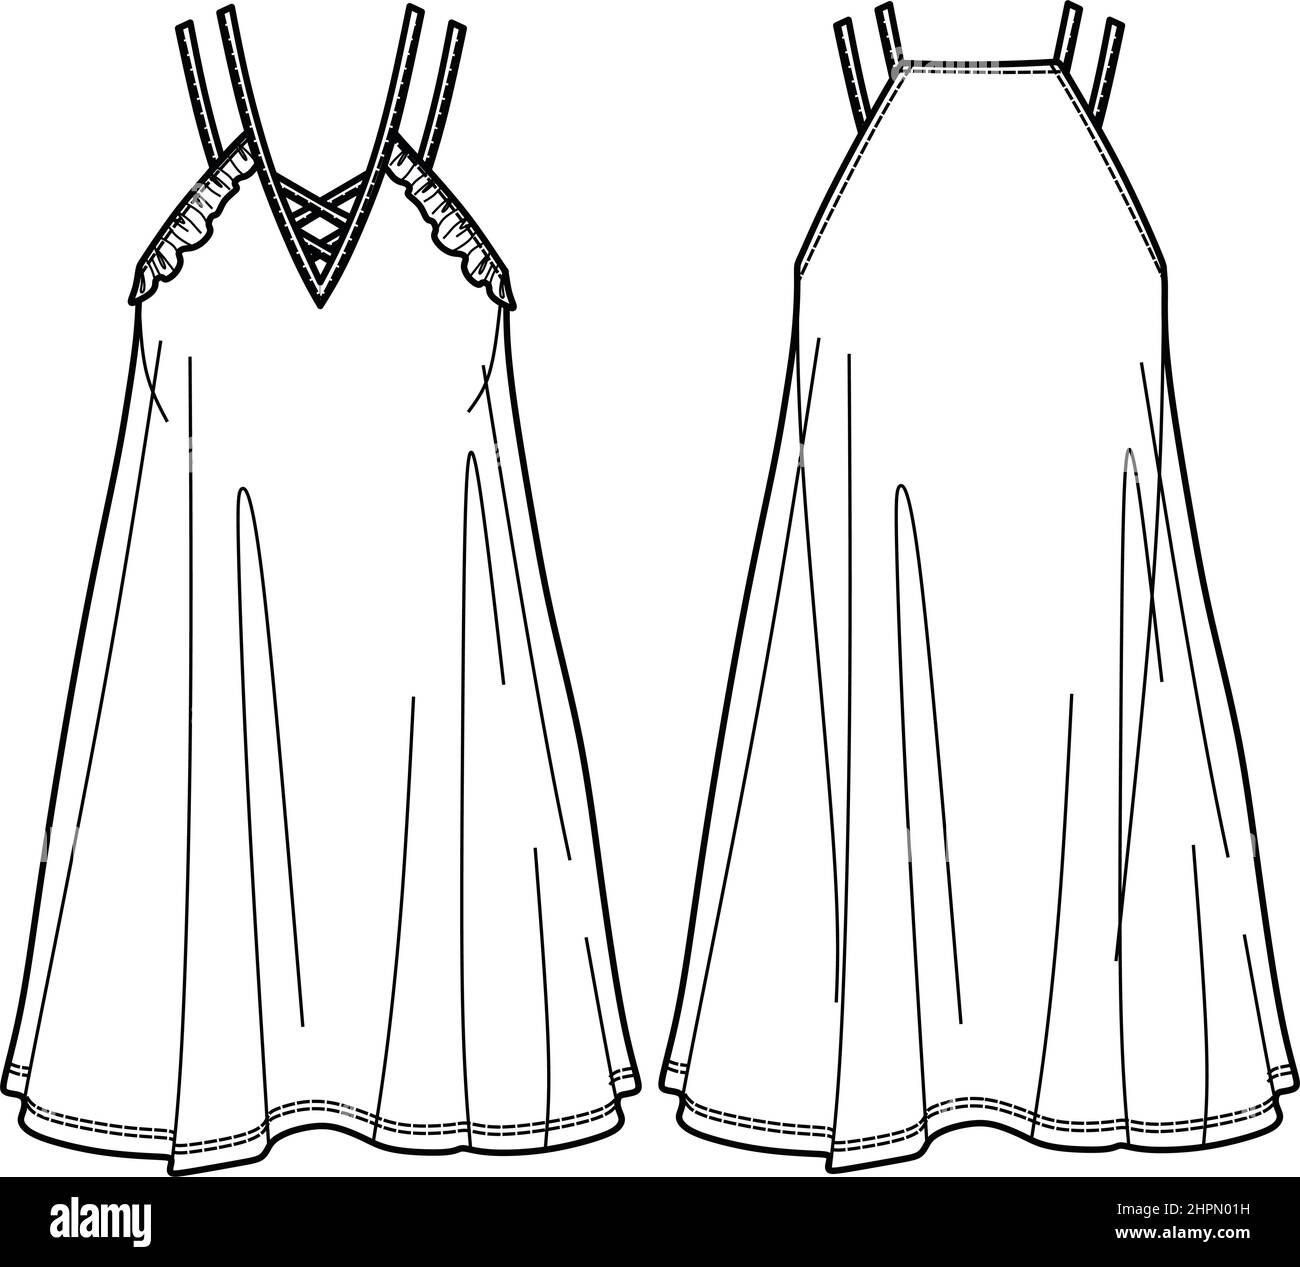 Dress fashion flat sketch template Stock Vector